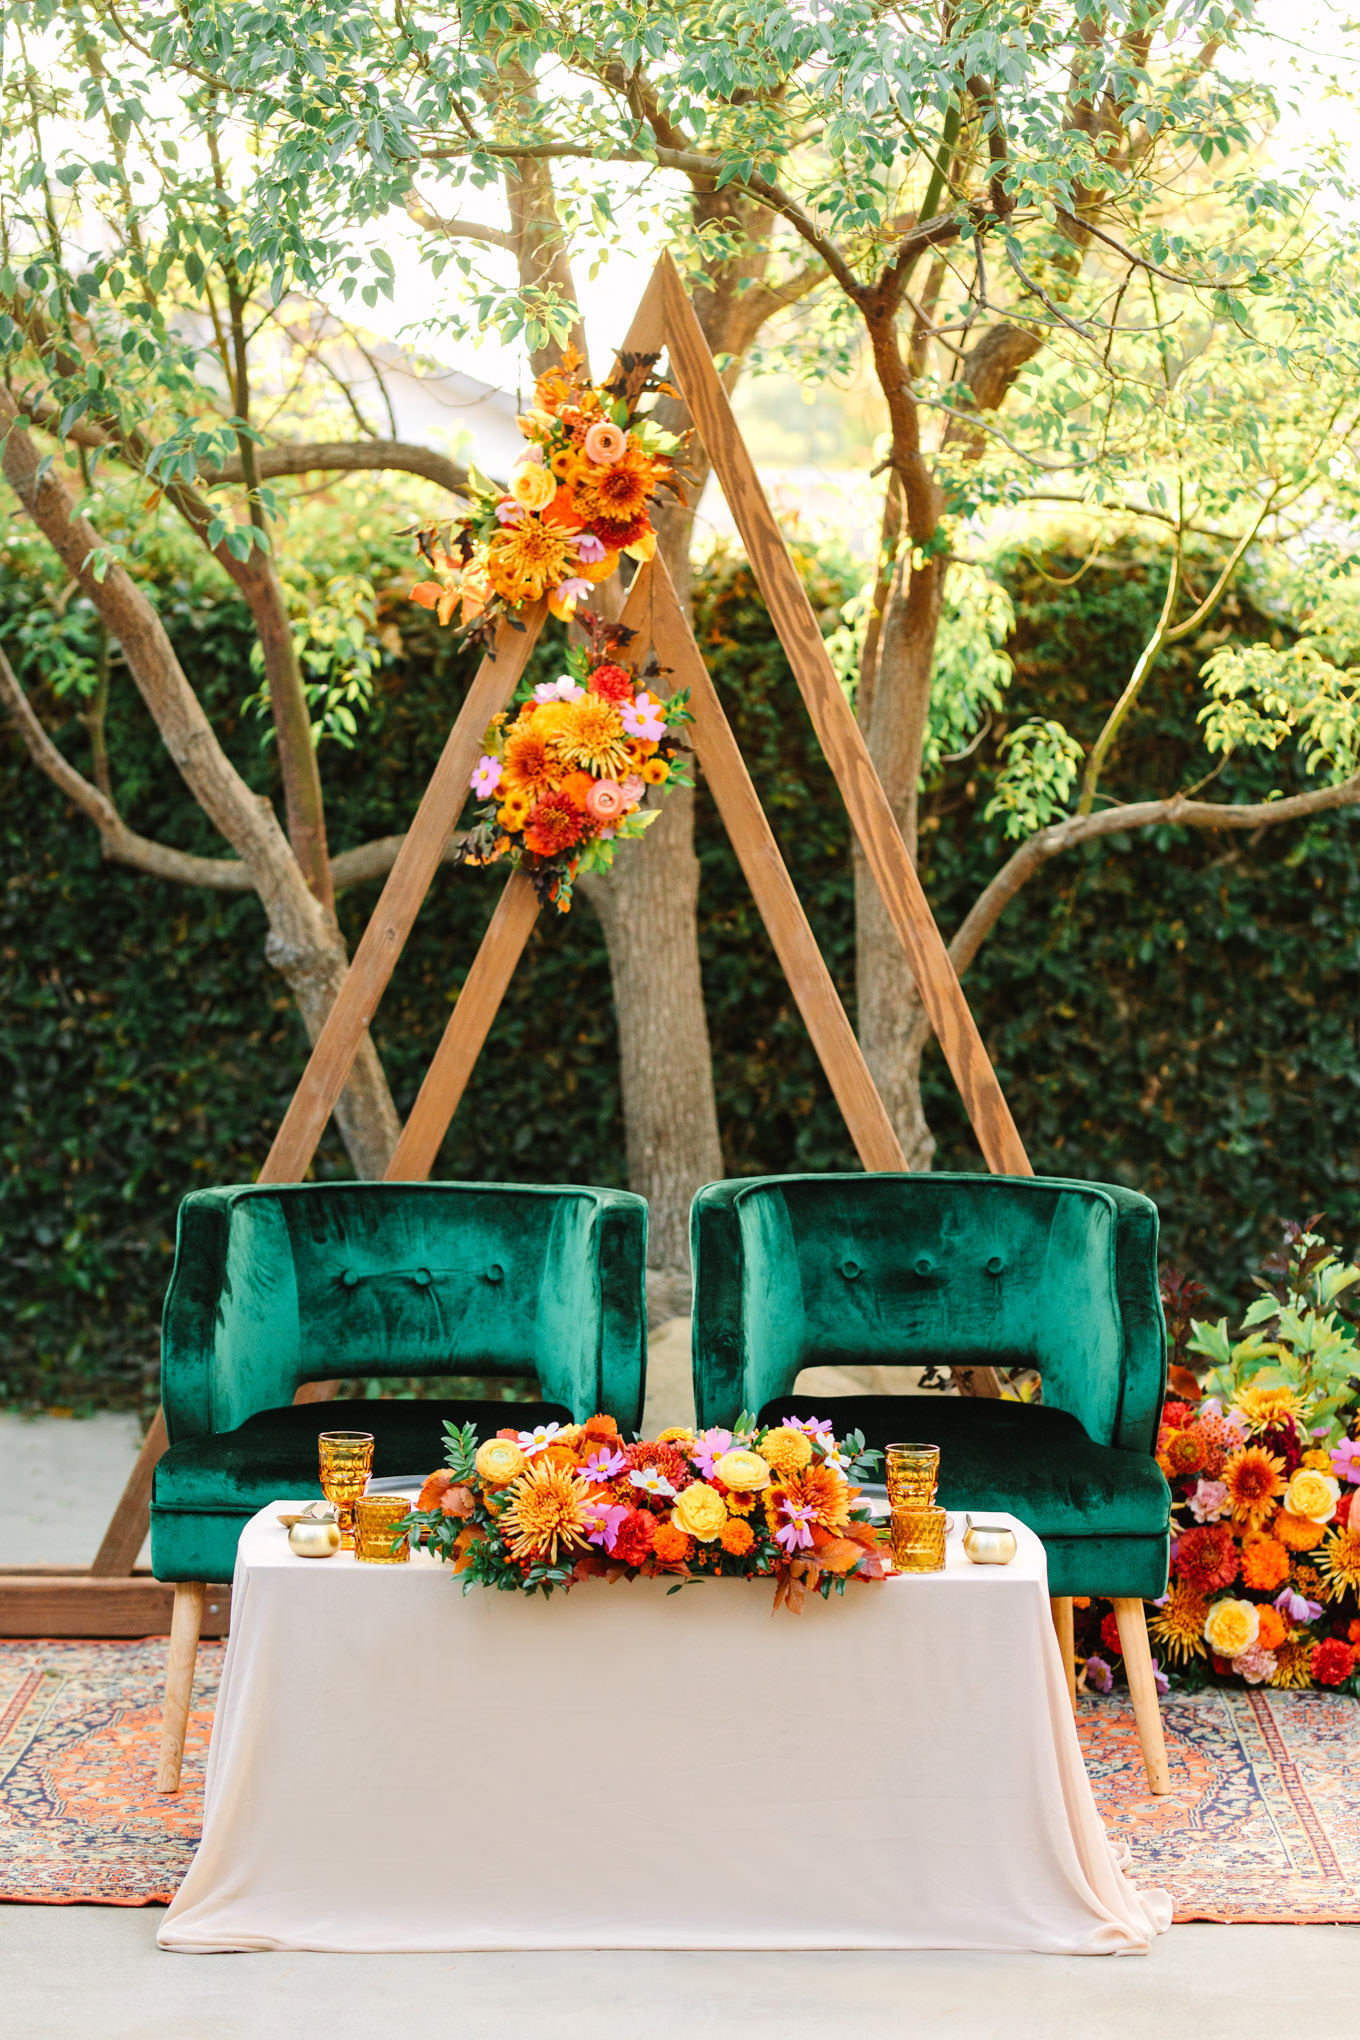 Unique seating with green velvet chairs and strikingly bold floral arrangements | Vibrant backyard micro wedding featured on Green Wedding Shoes | Colorful LA wedding photography | #losangeleswedding #backyardwedding #microwedding #laweddingphotographer Source: Mary Costa Photography | Los Angeles